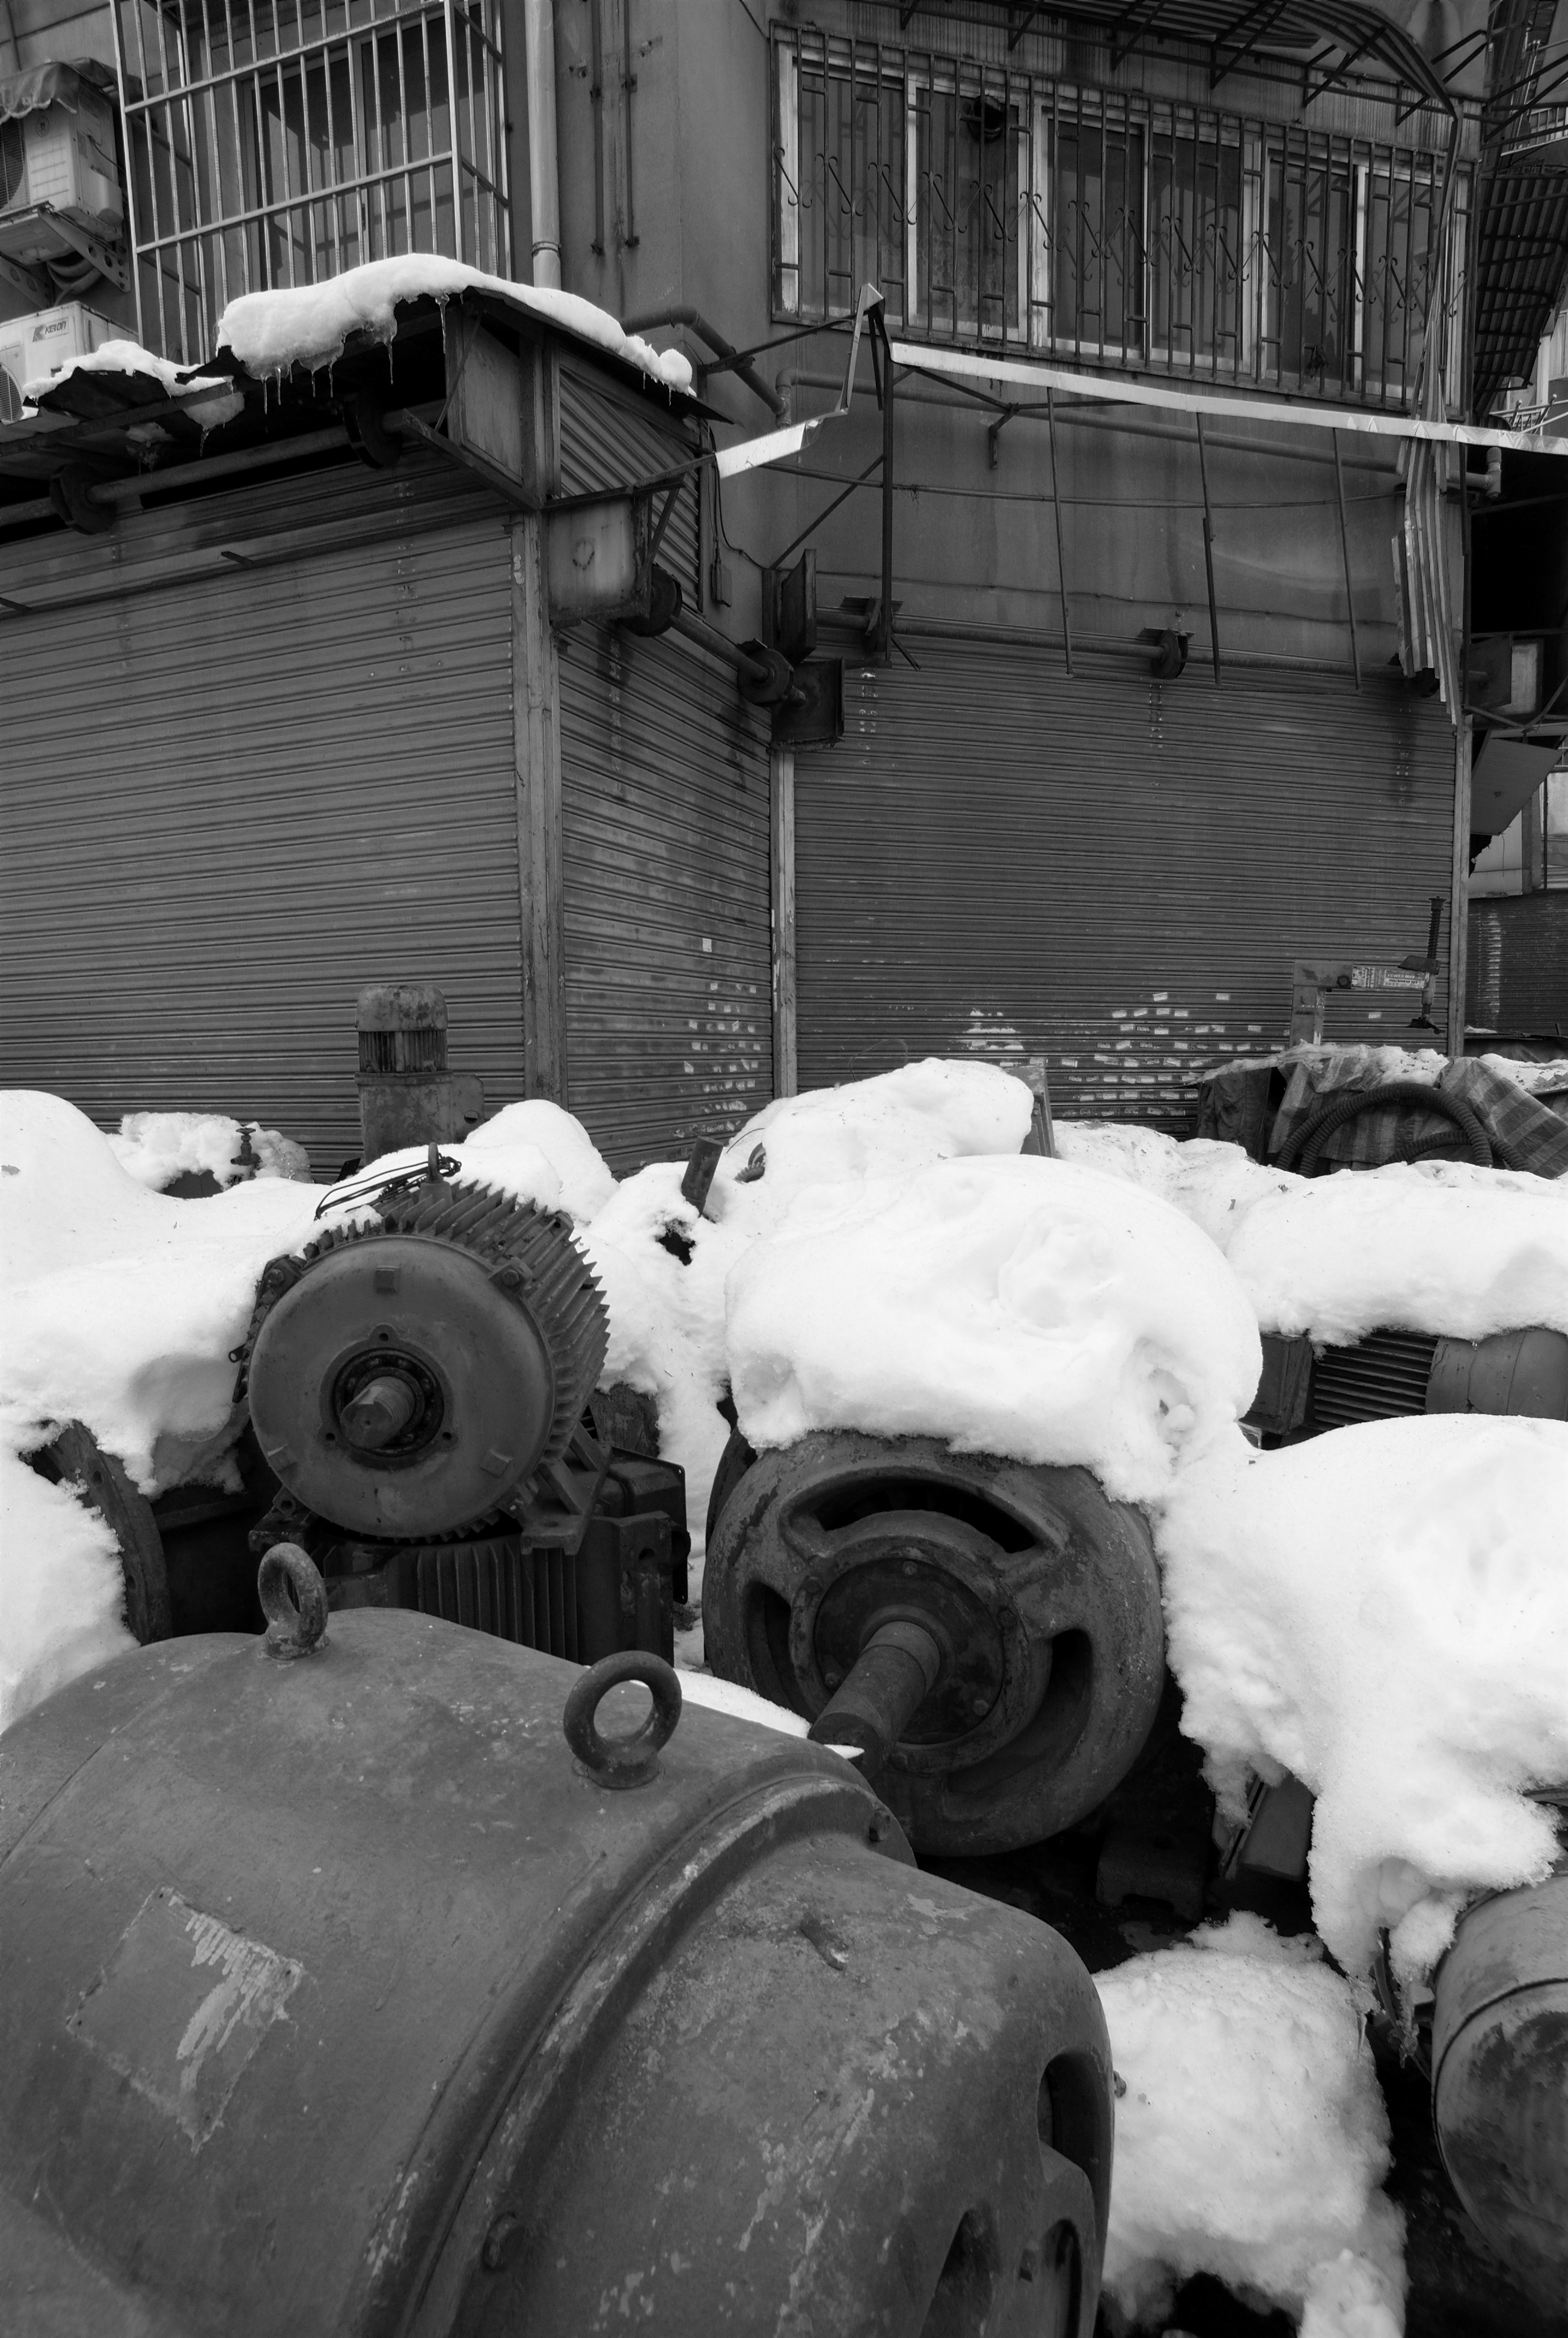 Electric engines under the snow